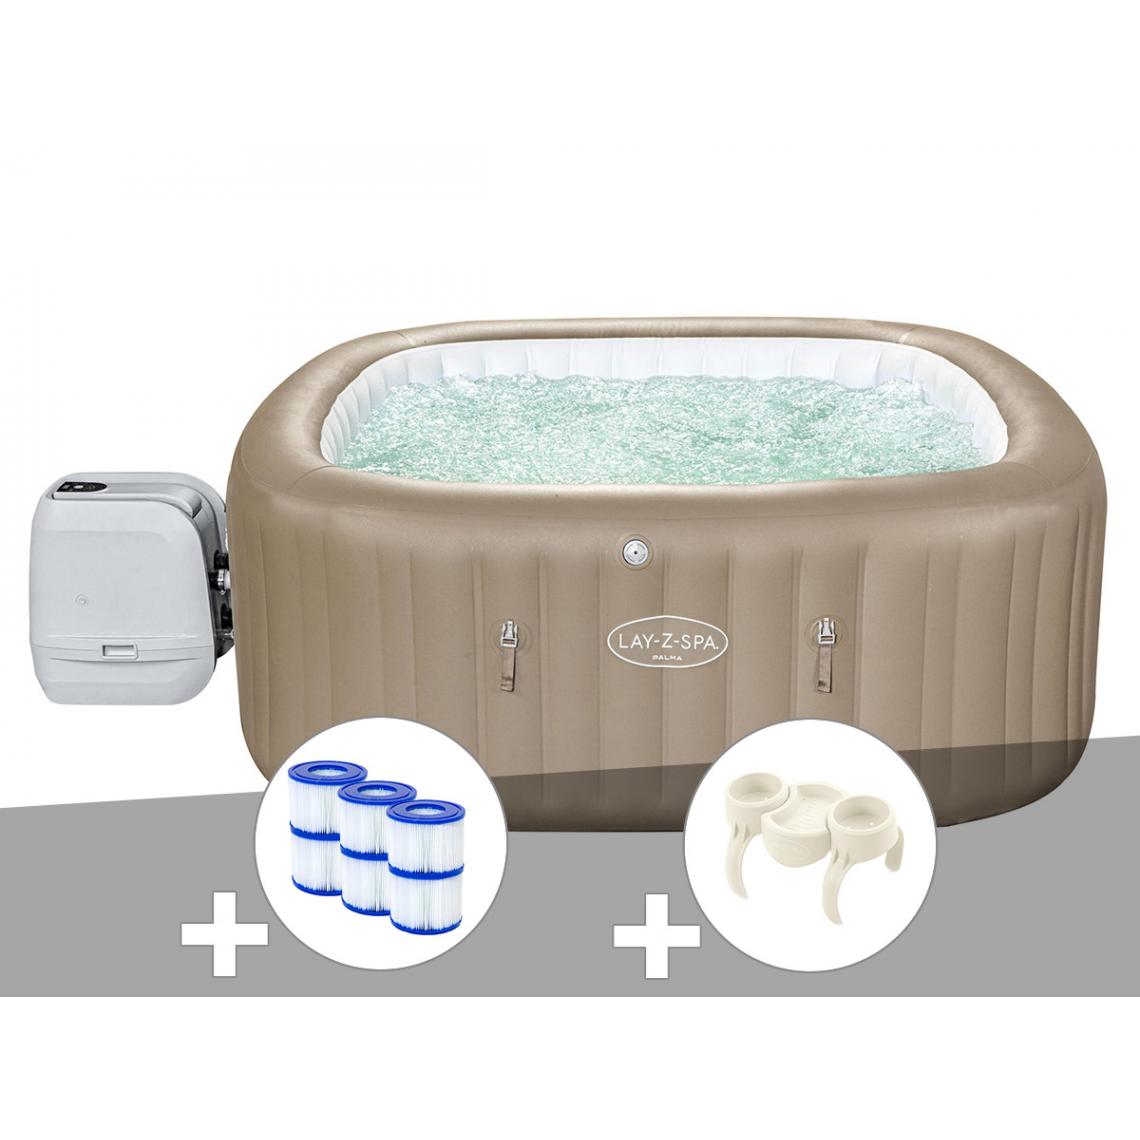 Bestway - Kit spa gonflable Bestway Lay-Z-Spa Palma carré Hydrojet Pro 5/7 places + 6 filtres + Porte-gobelets - Spa gonflable